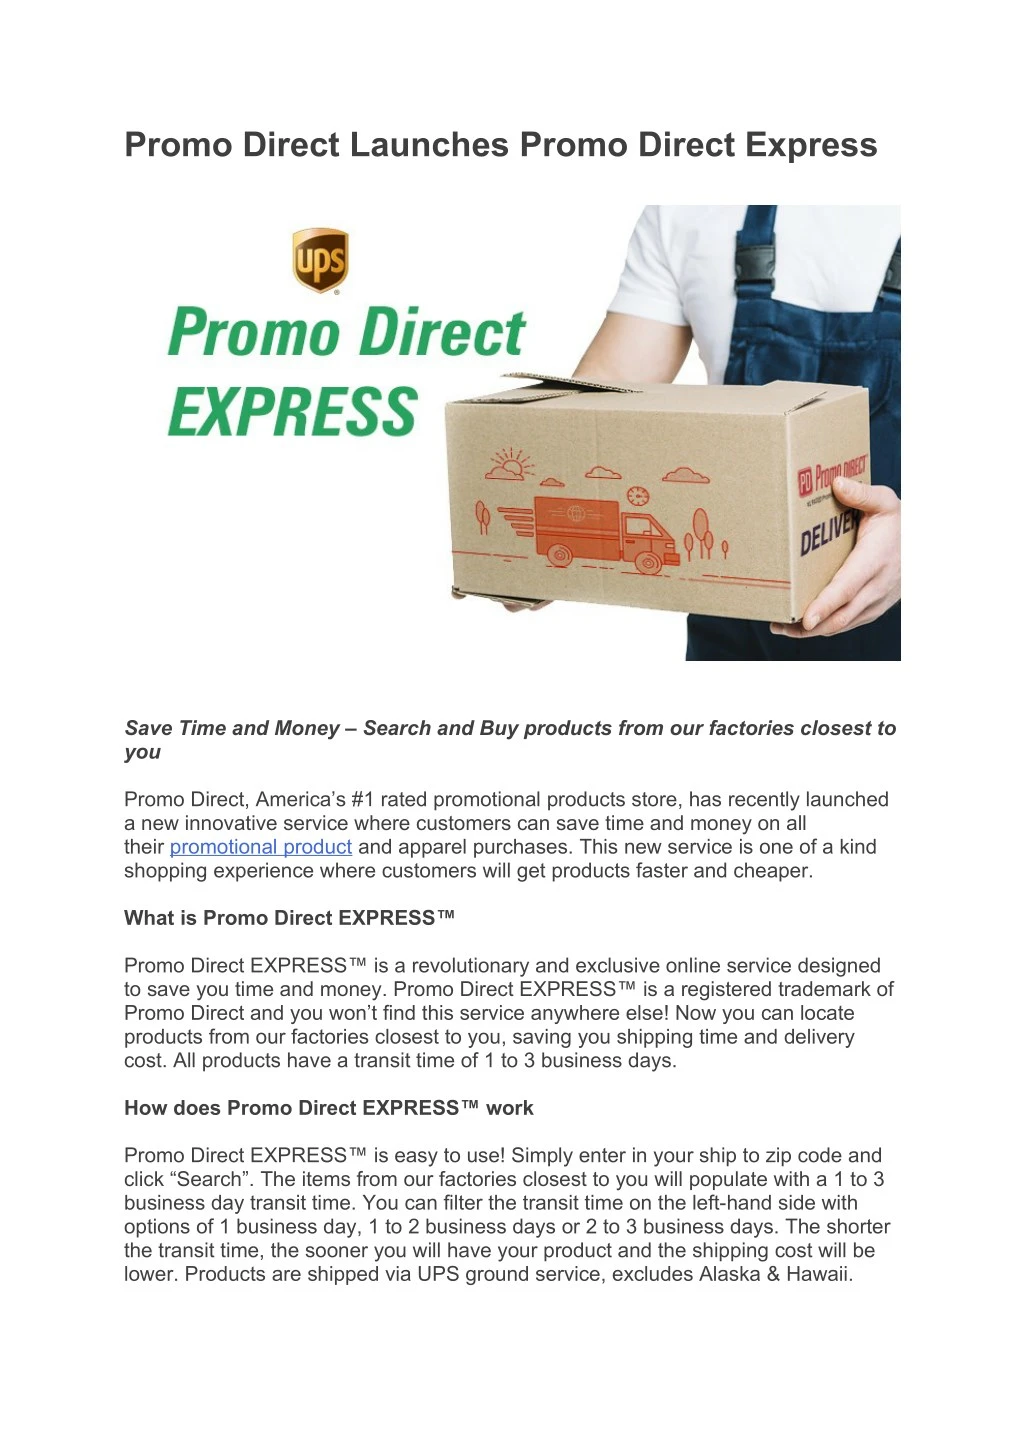 promo direct launches promo direct express